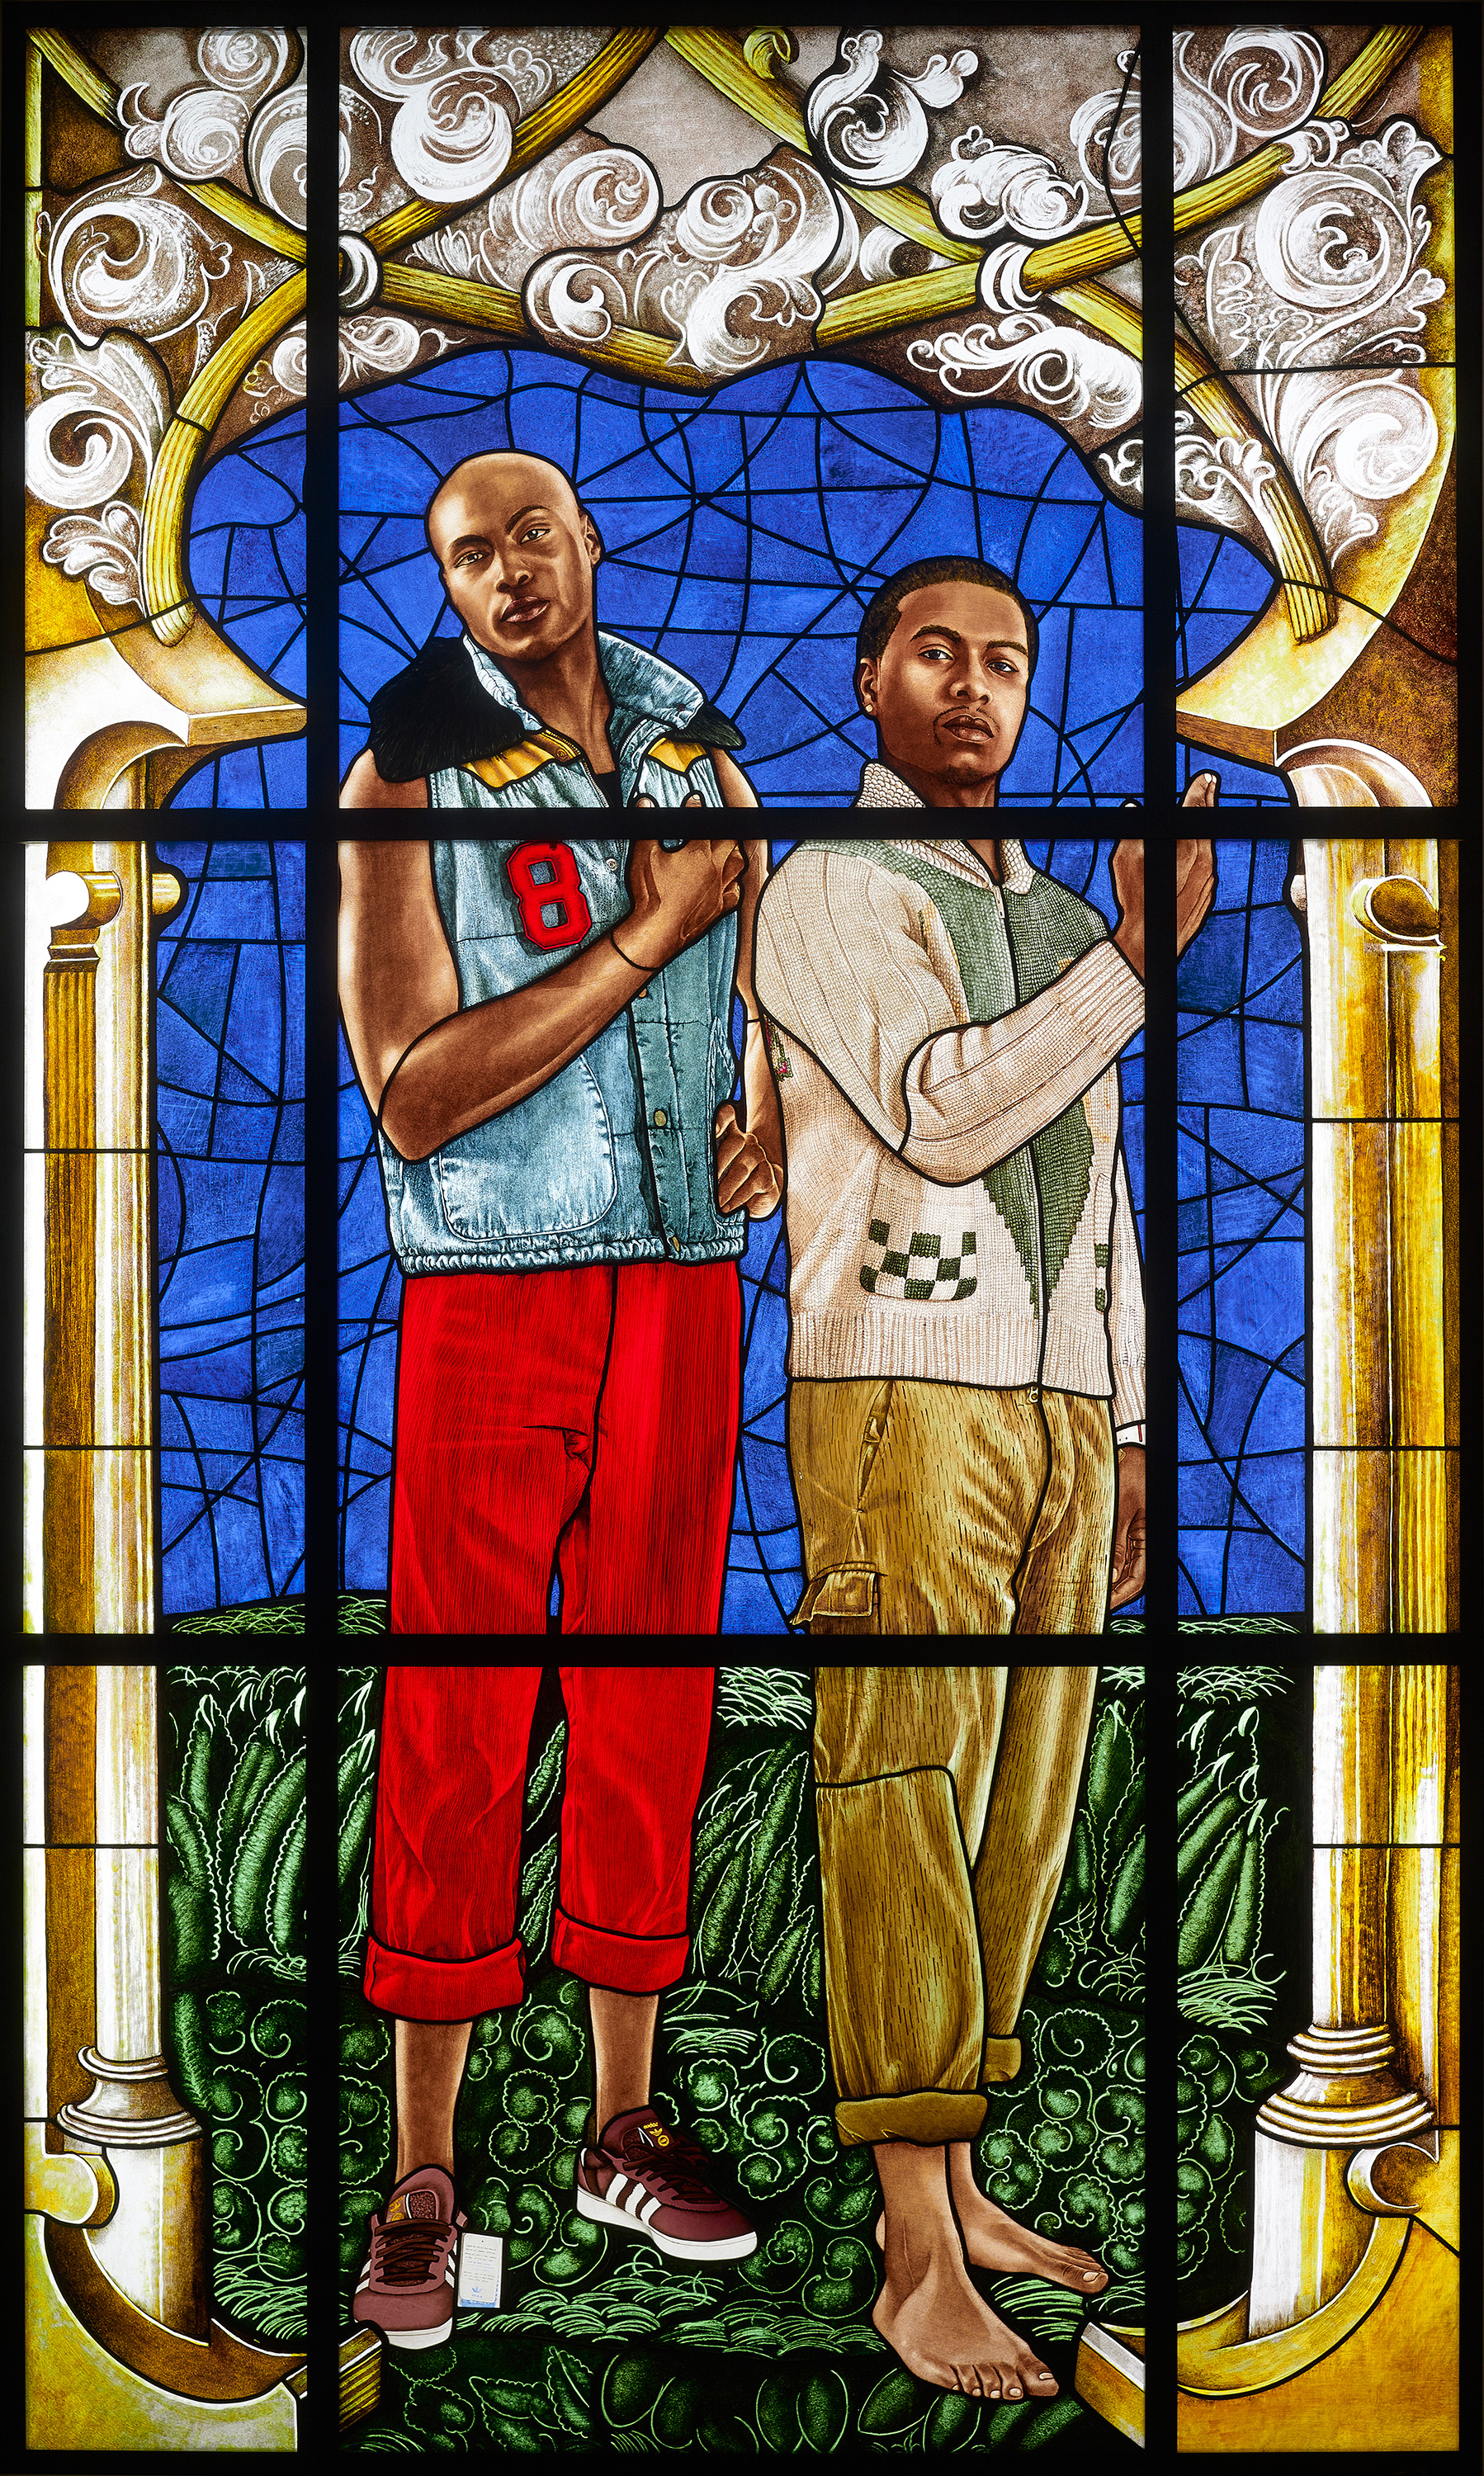 Kehinde Wiley | Stained Glass | Arms of Hugo Von Hohenlandenberg as Bishop of Constance with Angel Supporters, 2014 Stained Glass.  | 5